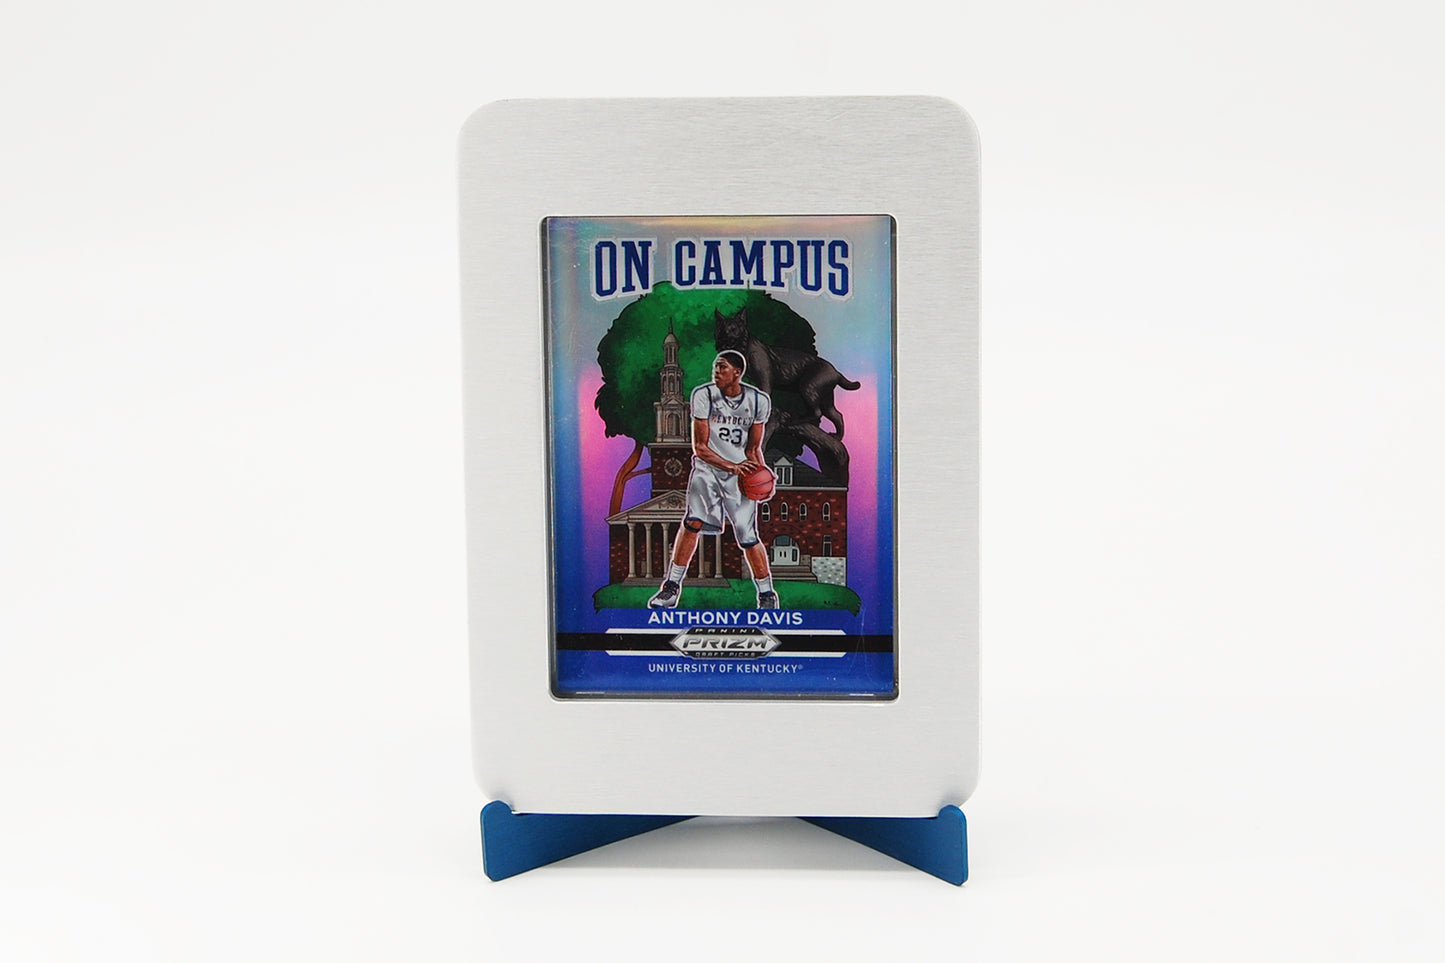 Aluminum Single Card Frame (accepts Magnetic / One Touch 35 pt. card holders)